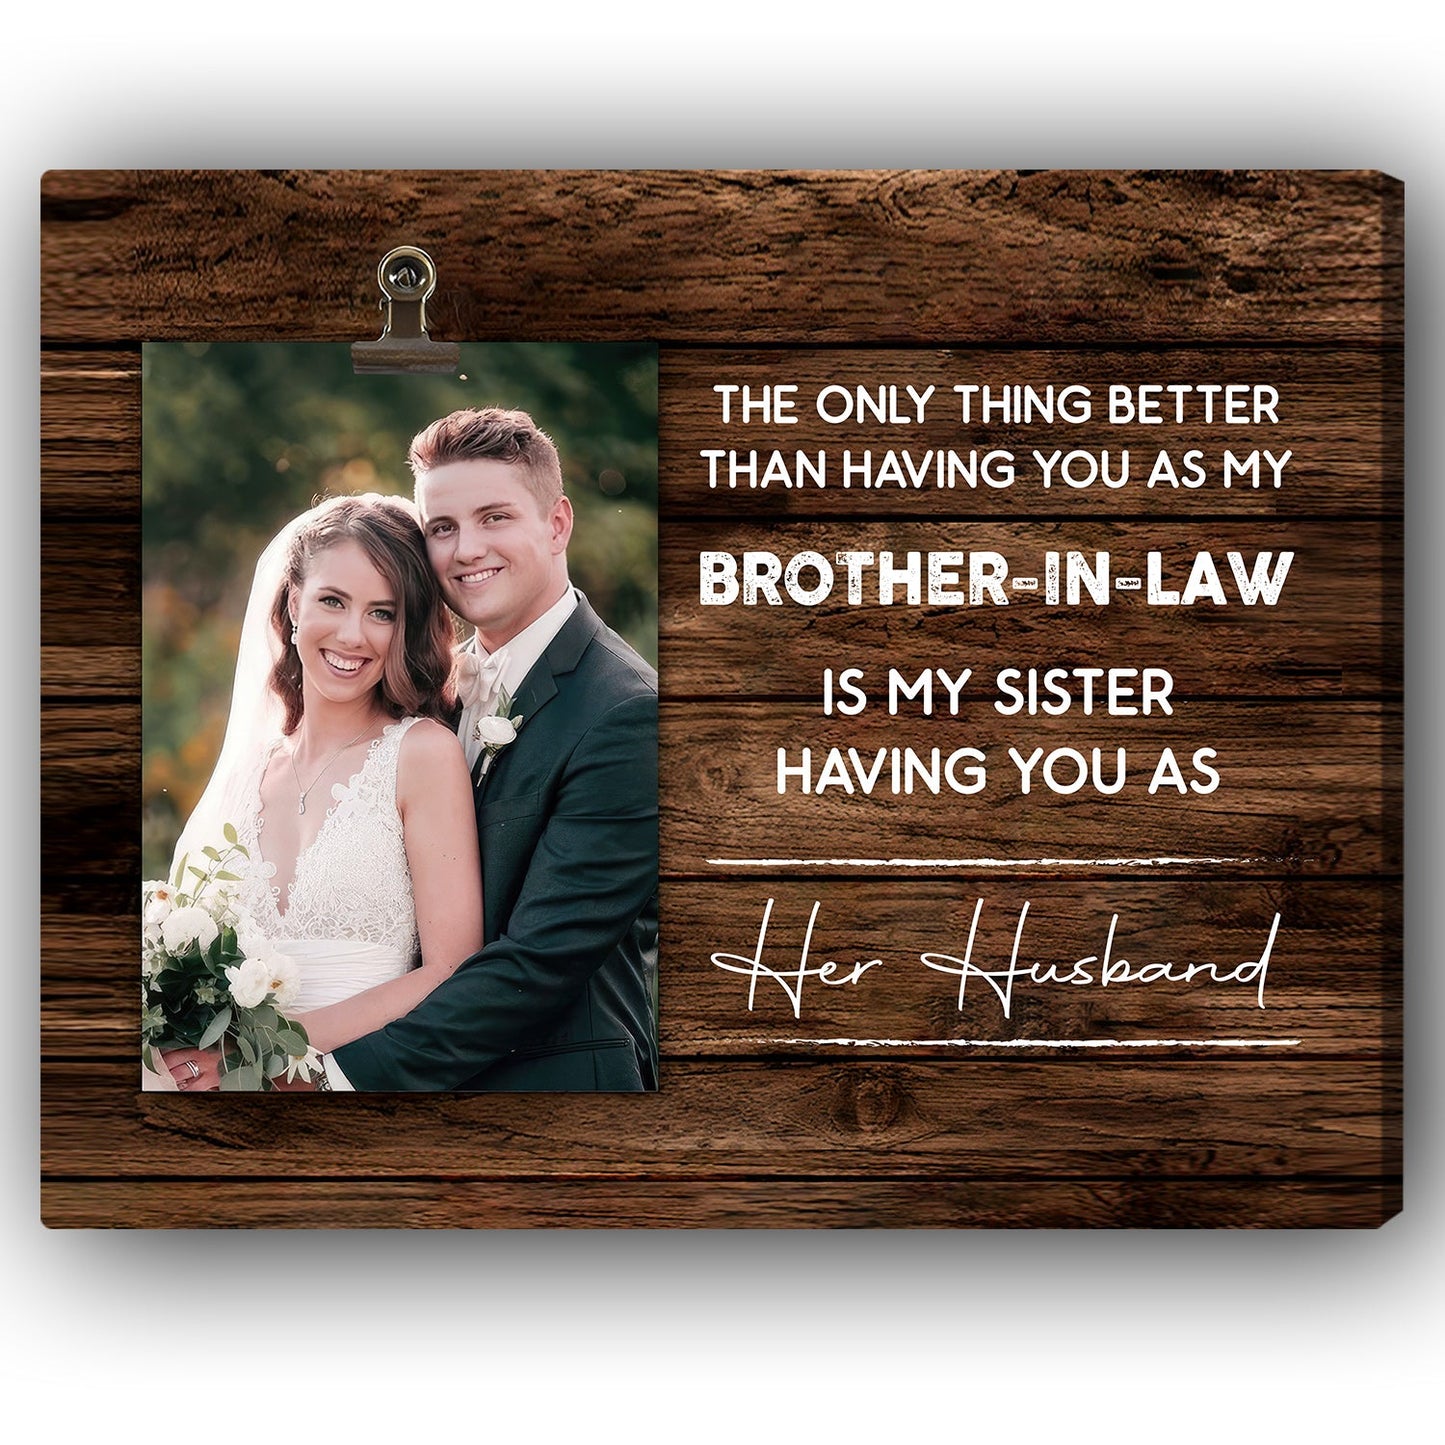 The Only Thing BetterThan Having You As My Brother In Law - Personalized Birthday or Christmas gift For Brother In Law - Custom Canvas Print - MyMindfulGifts